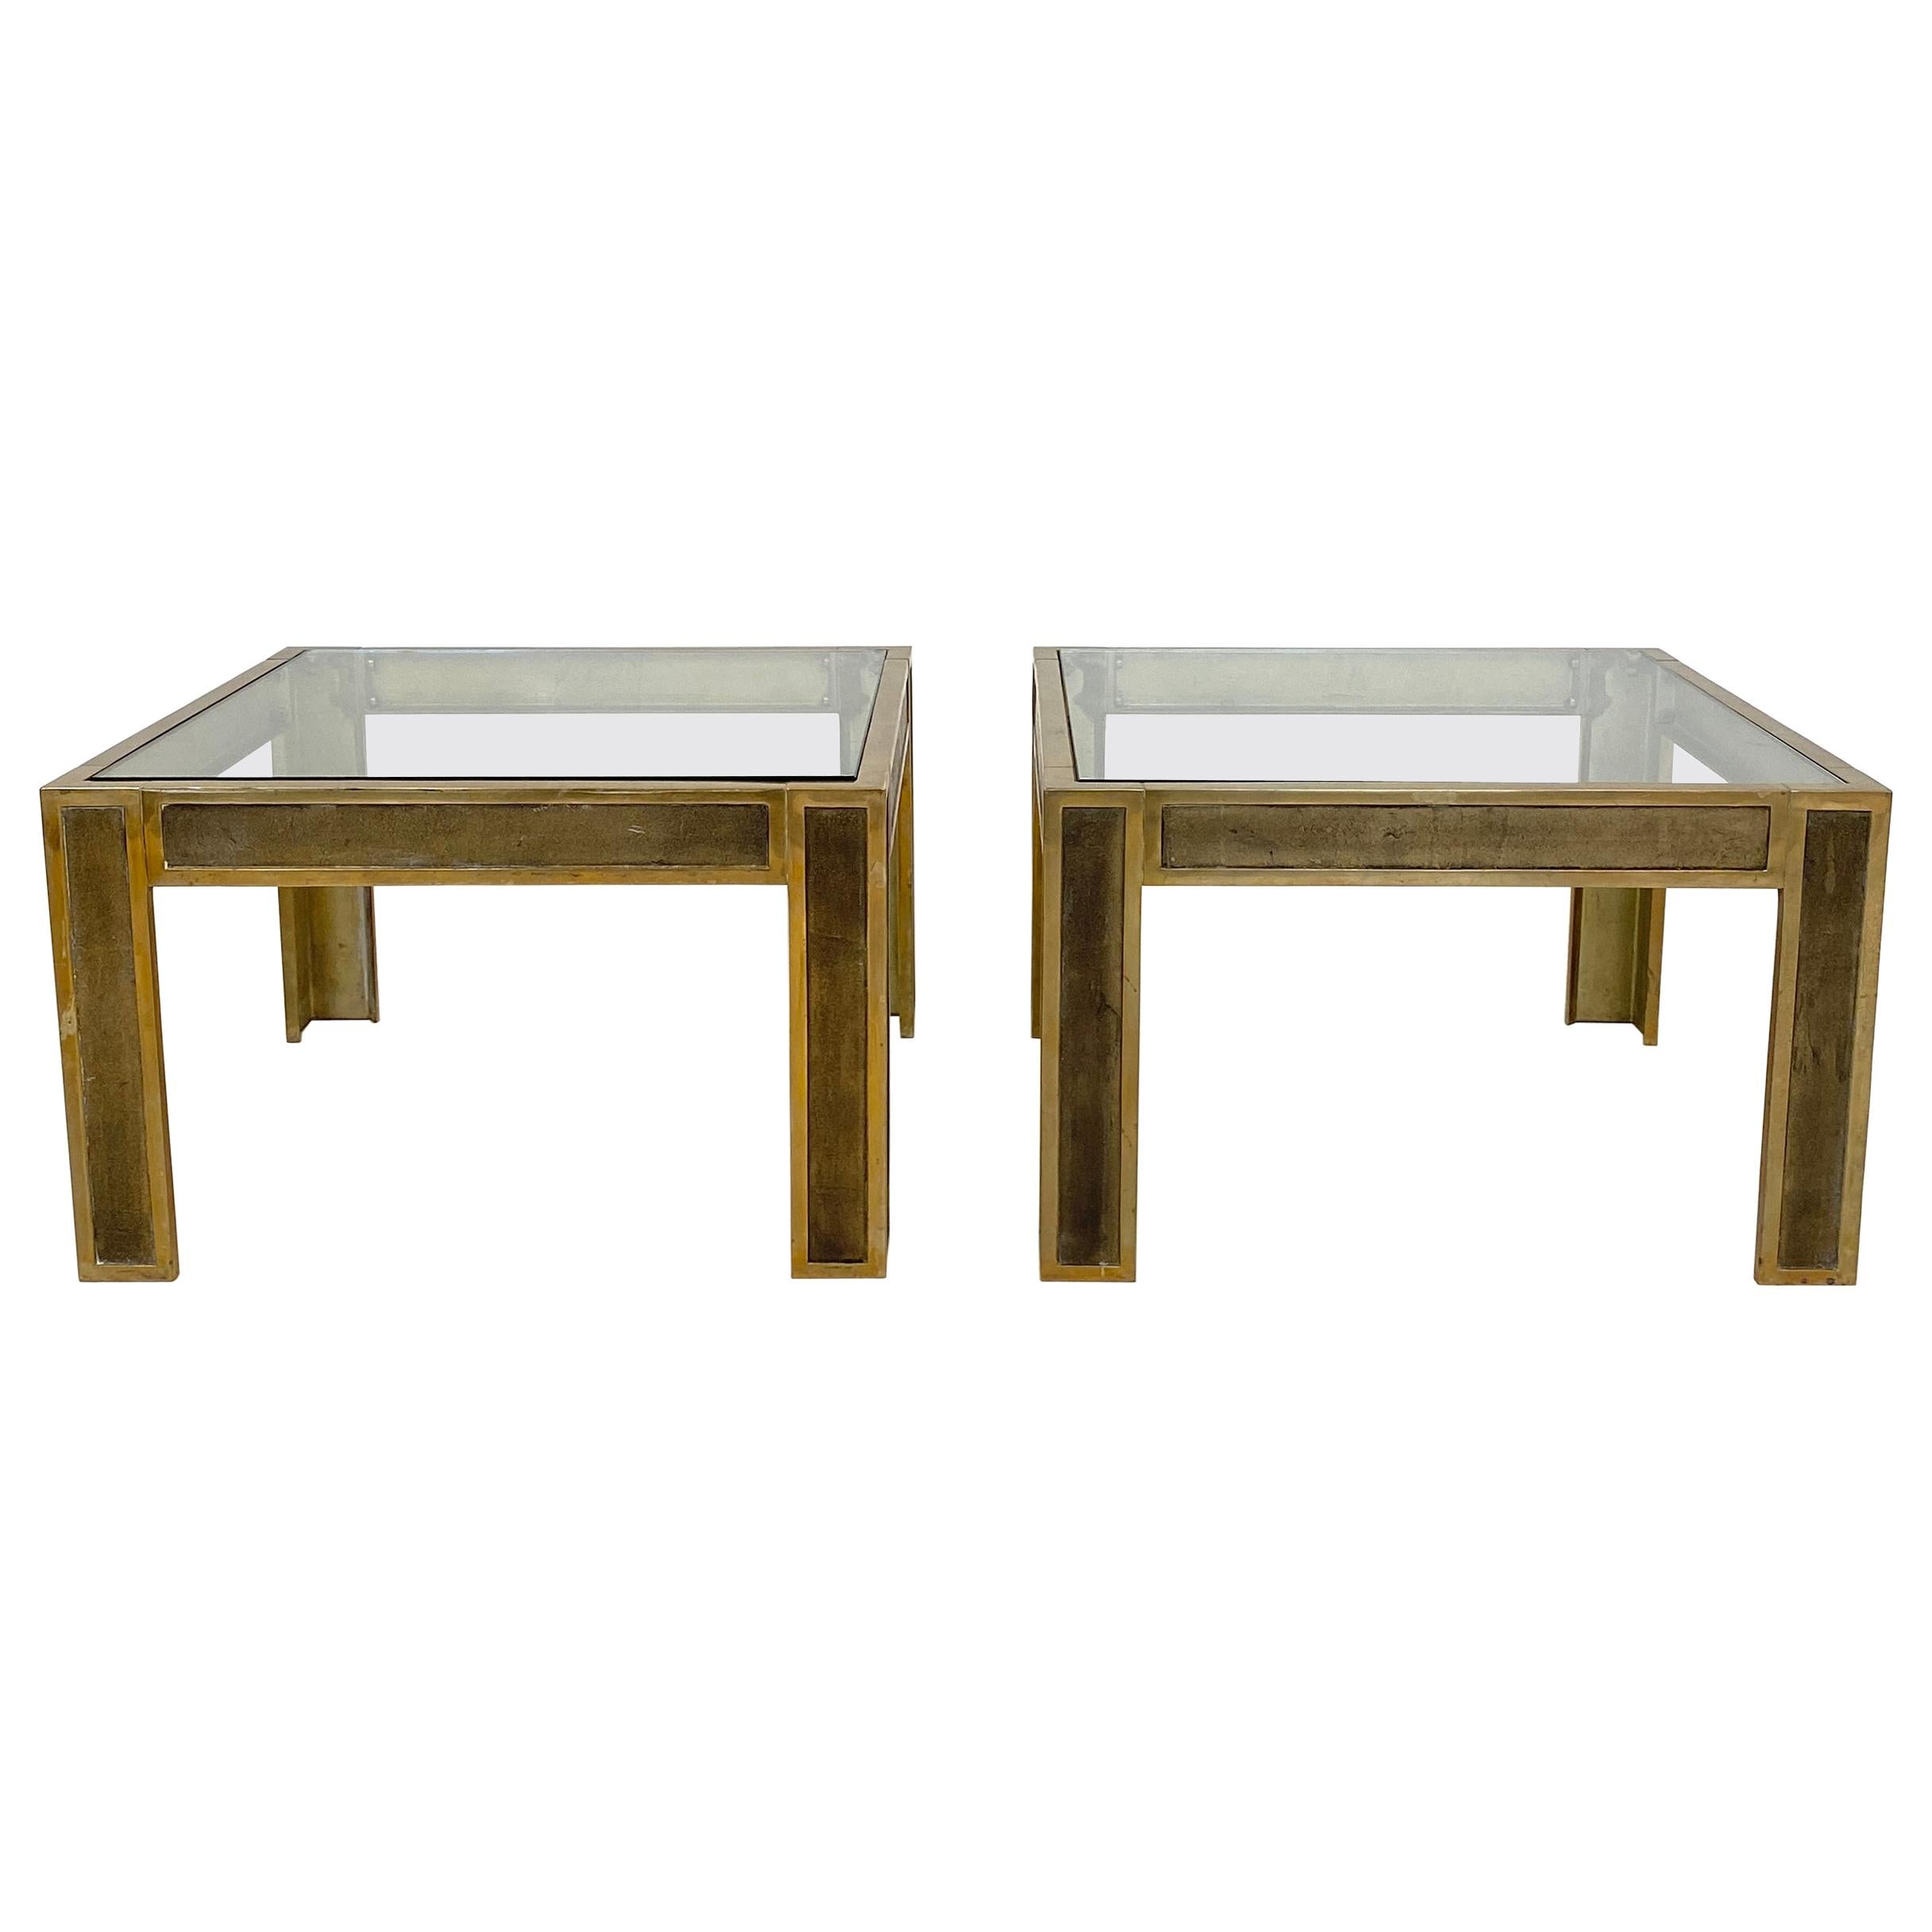 Pair of Mid-Century Brass and Glass Sofa Tables or Coffee Tables by Ghyczy